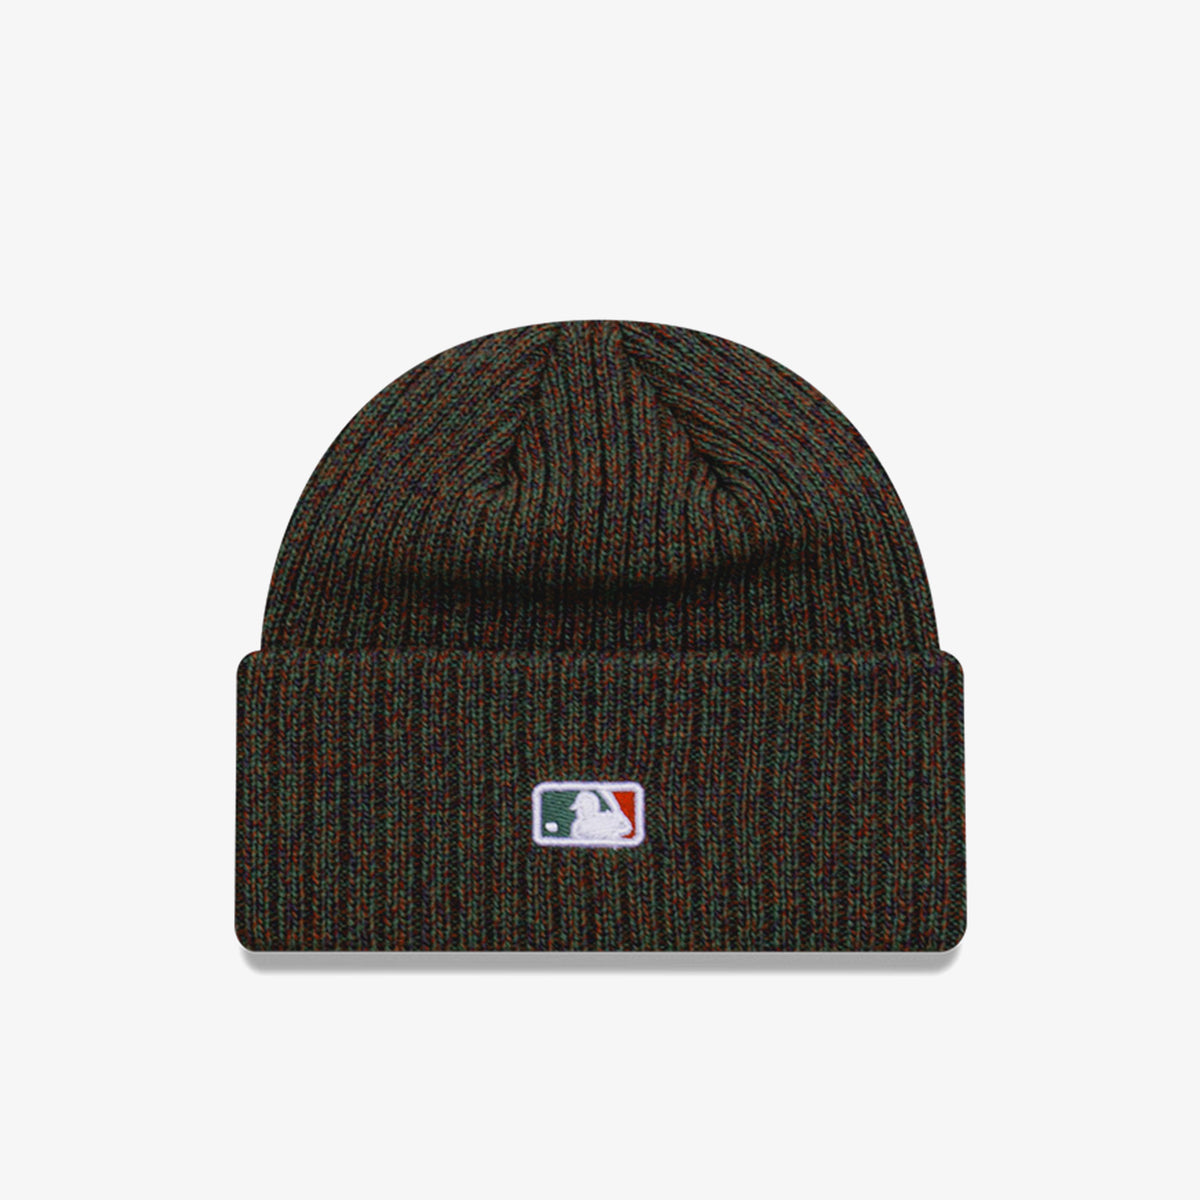 New York Speckle Knit Beanie - Green Marle